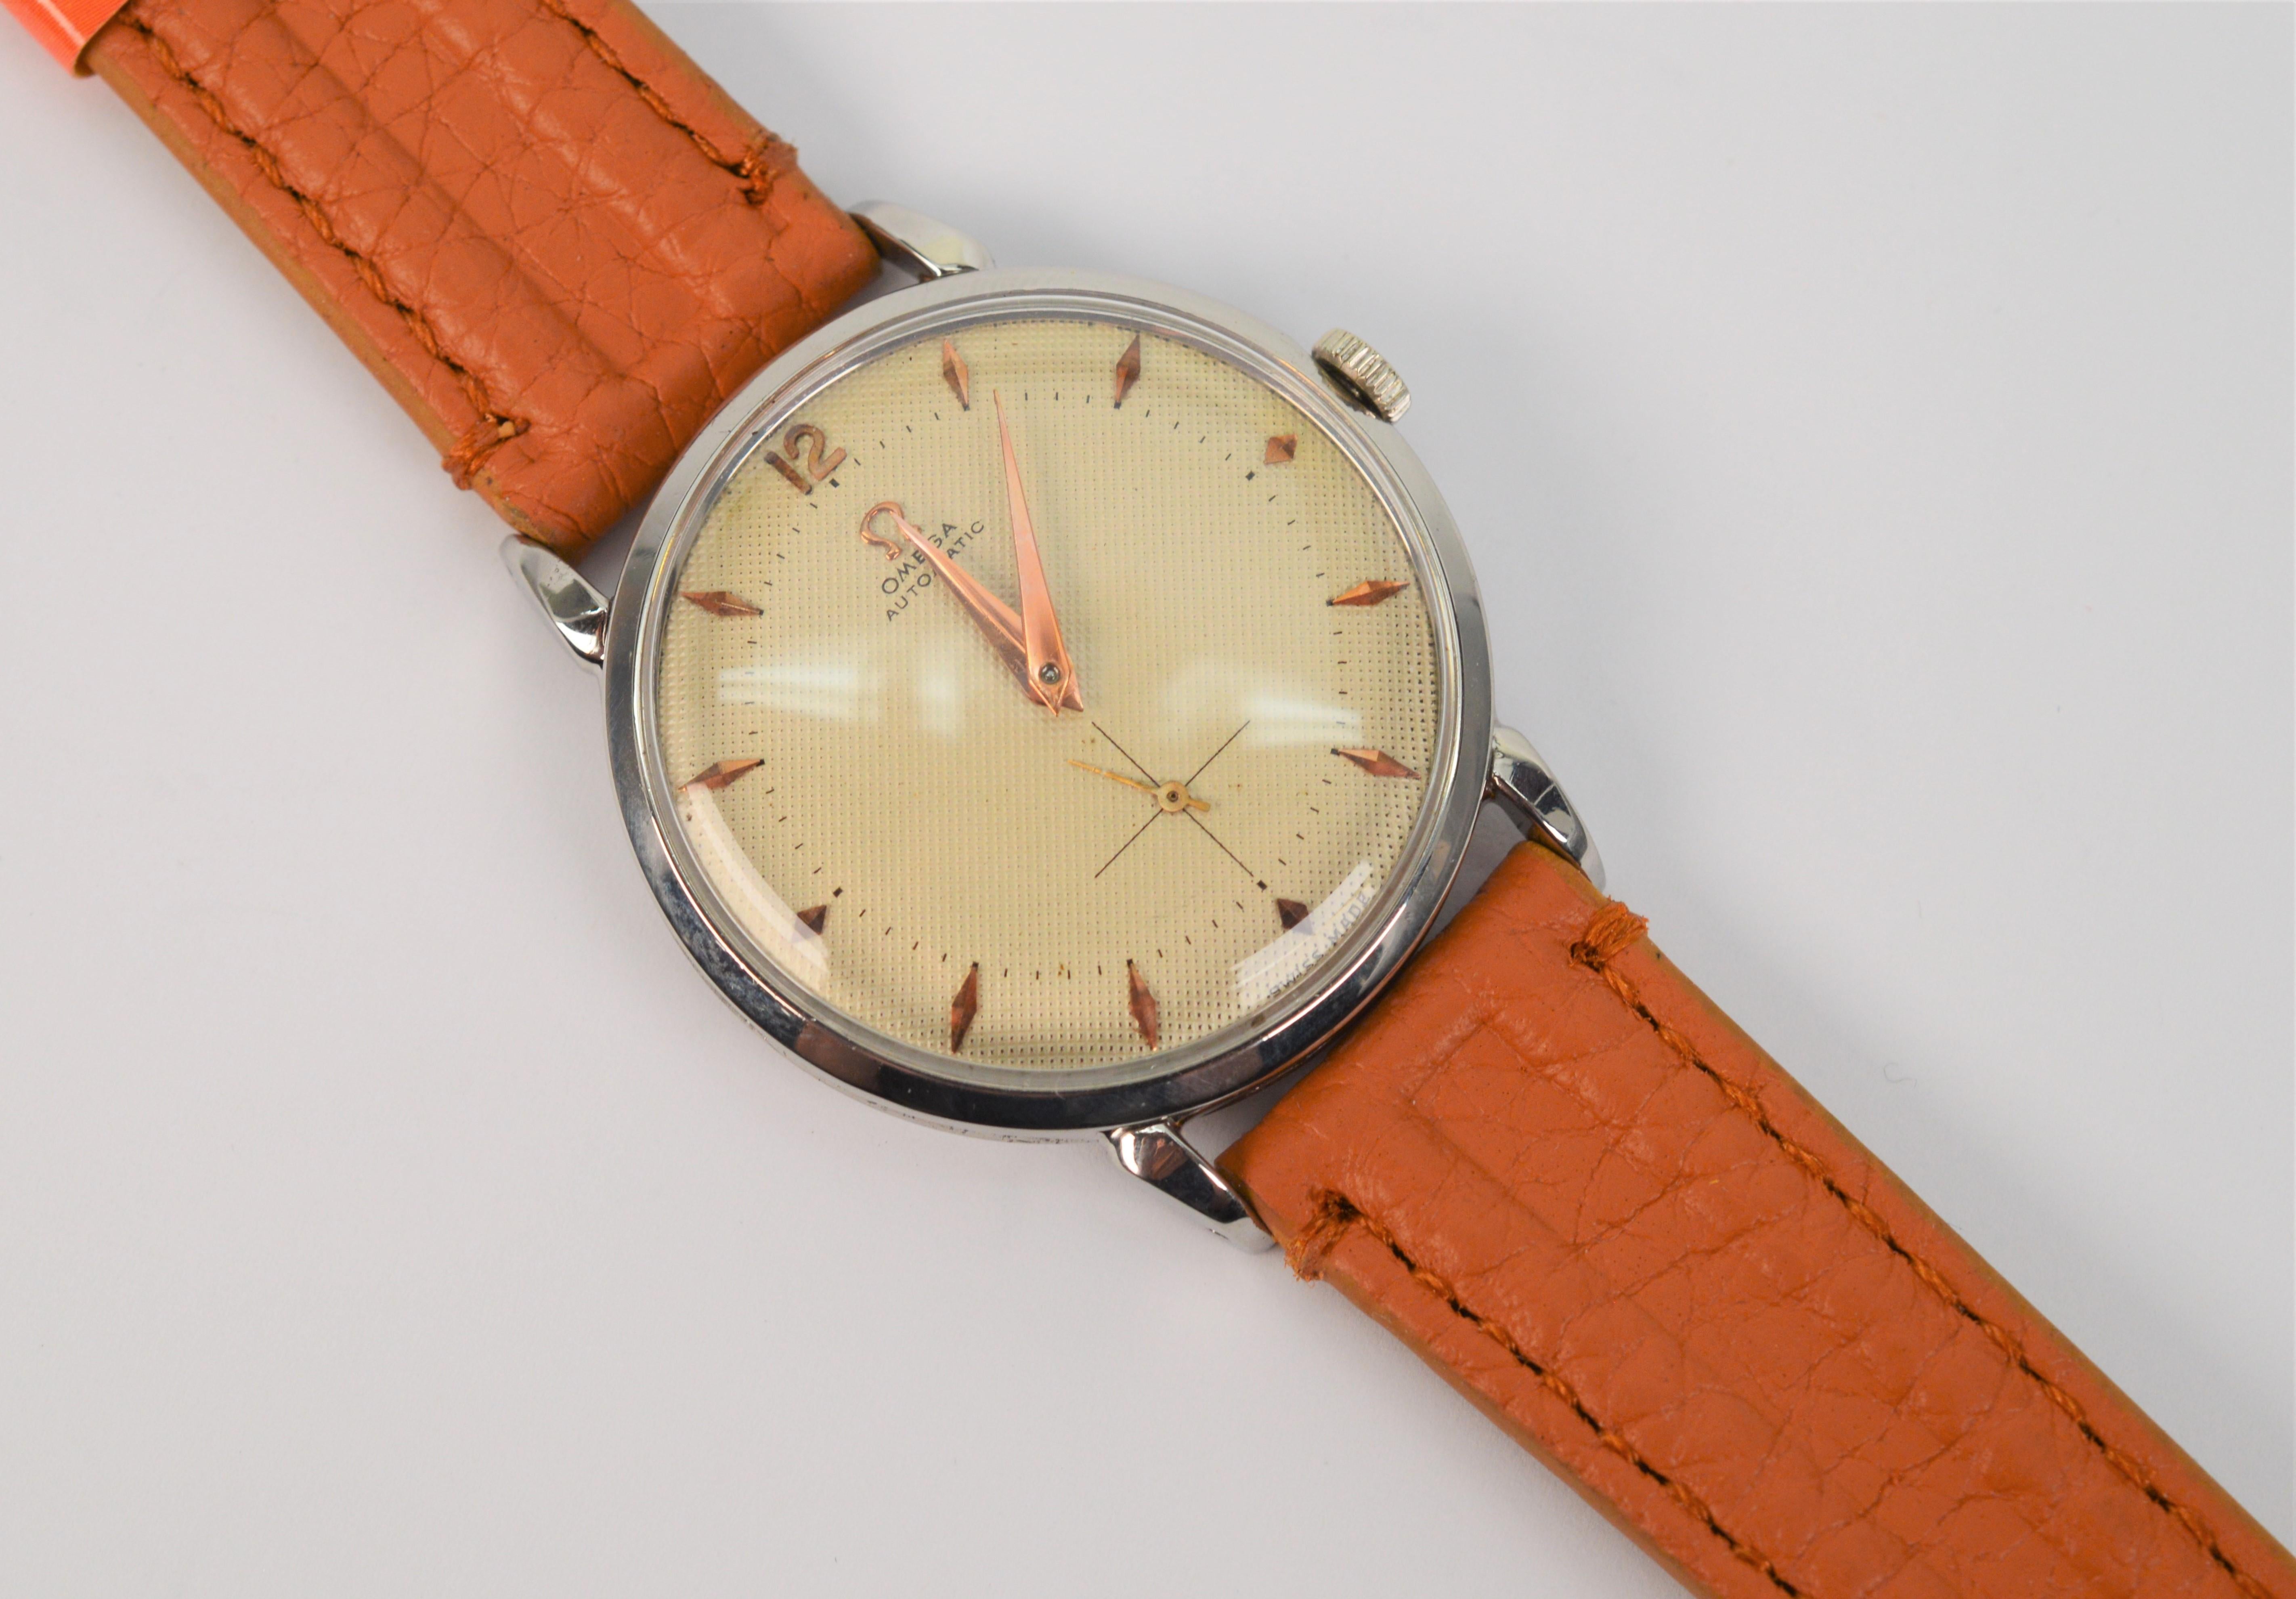 A seventeen jeweled Omega Swiss automatic movement powers this classic Omega 342 Men's Steel Wrist Watch, serial number 13104196. The circa 1952 steel timepiece, case number 2658-2 has a pristine linen color face and coppery color match stick